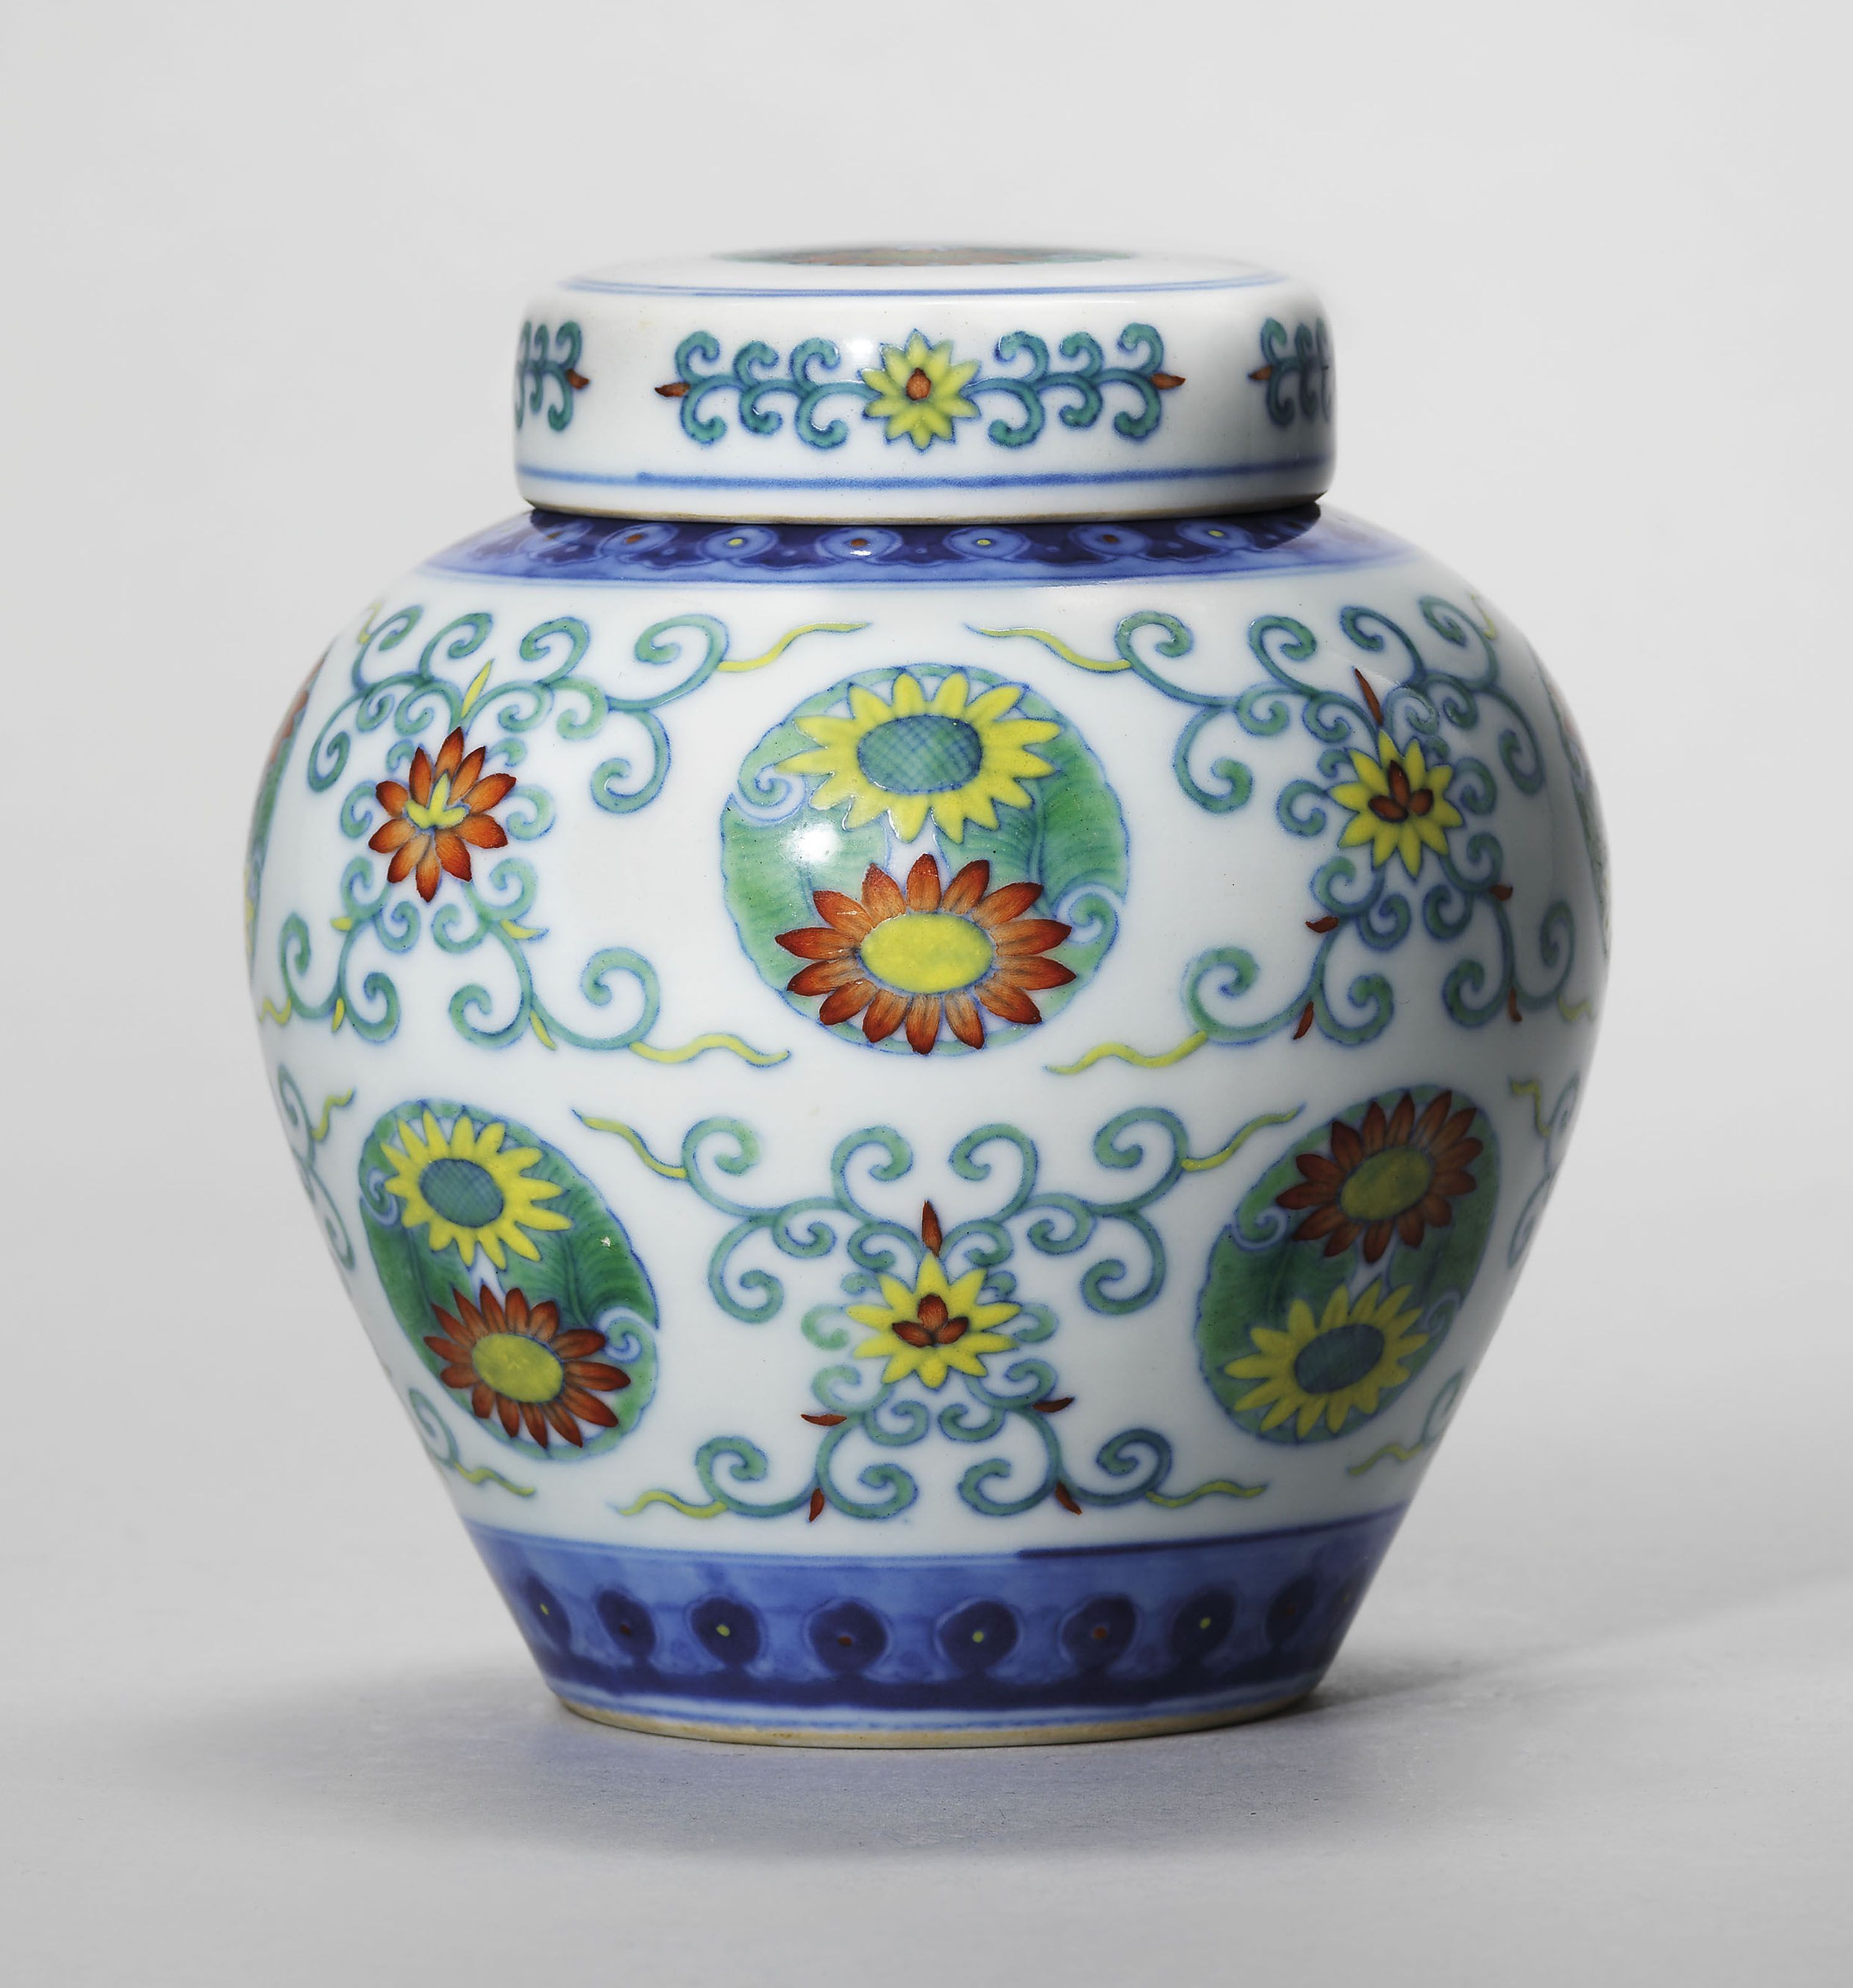 16 Famous Blue and White Porcelain Vases for Sale 2024 free download blue and white porcelain vases for sale of 31 ginger jar vase the weekly world regarding a guide to the symbolism of flowers on chinese ceramics